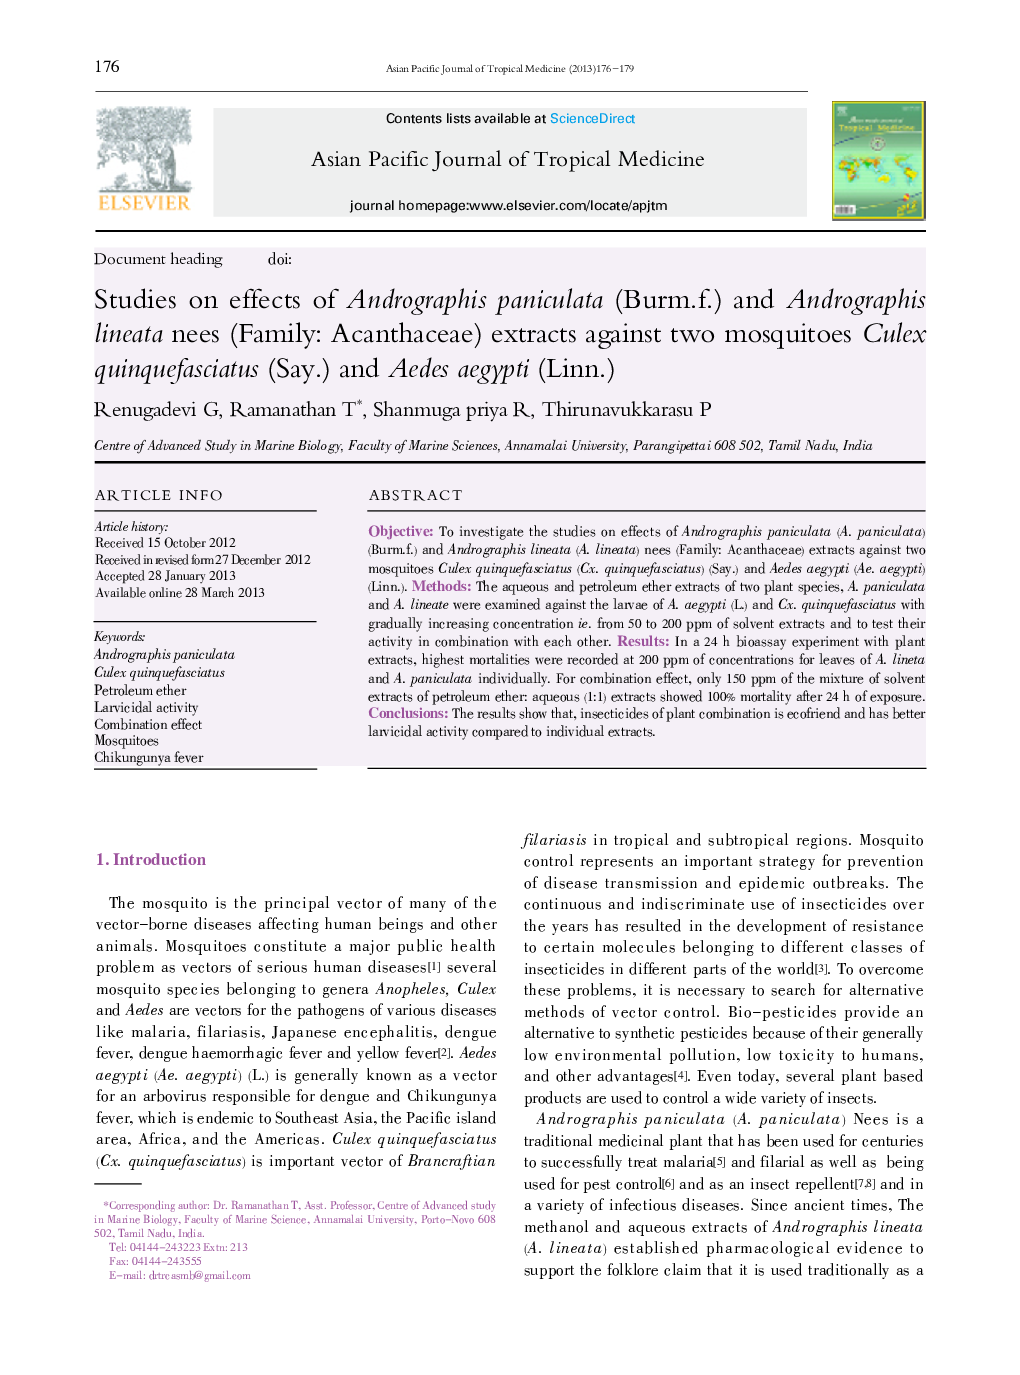 Studies on effects of Andrographis paniculata (Burm.f.) and Andrographis lineata nees (Family: Acanthaceae) extracts against two mosquitoes Culex quinquefasciatus (Say.) and Aedes aegypti (Linn.) 